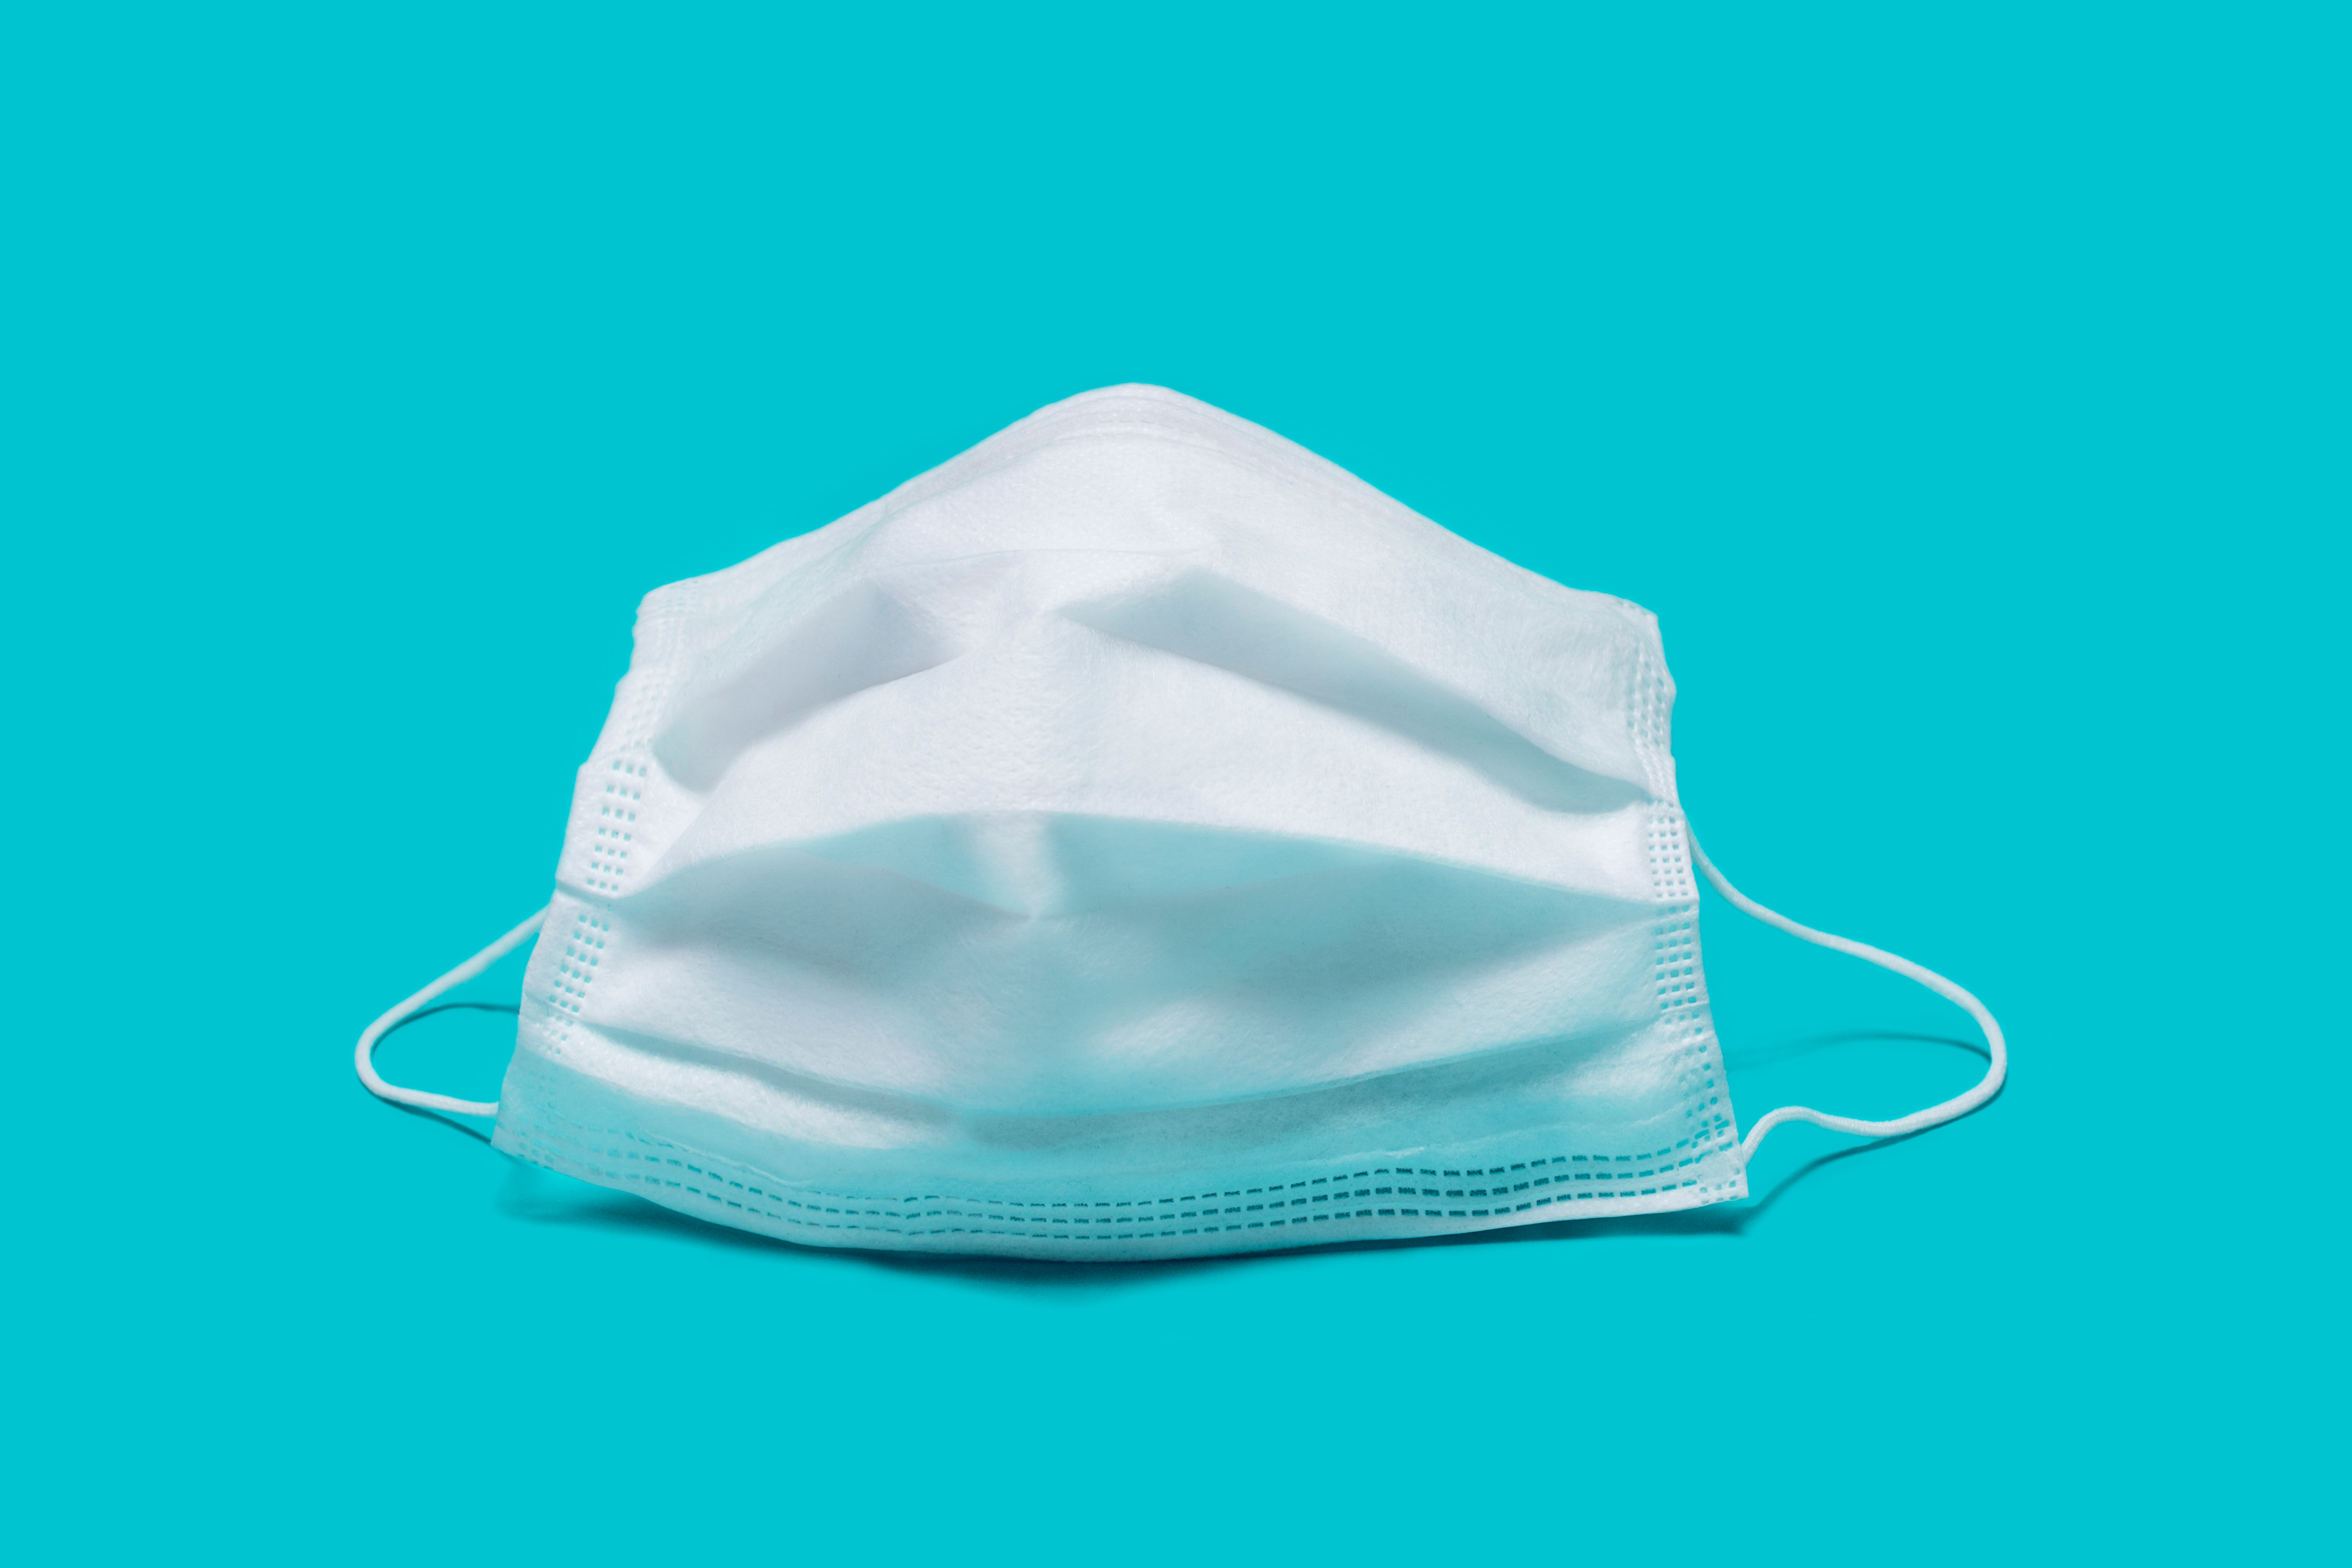 IRS says COVID PPEs like face masks are FSA, HSA, and HRA eligible - Navia